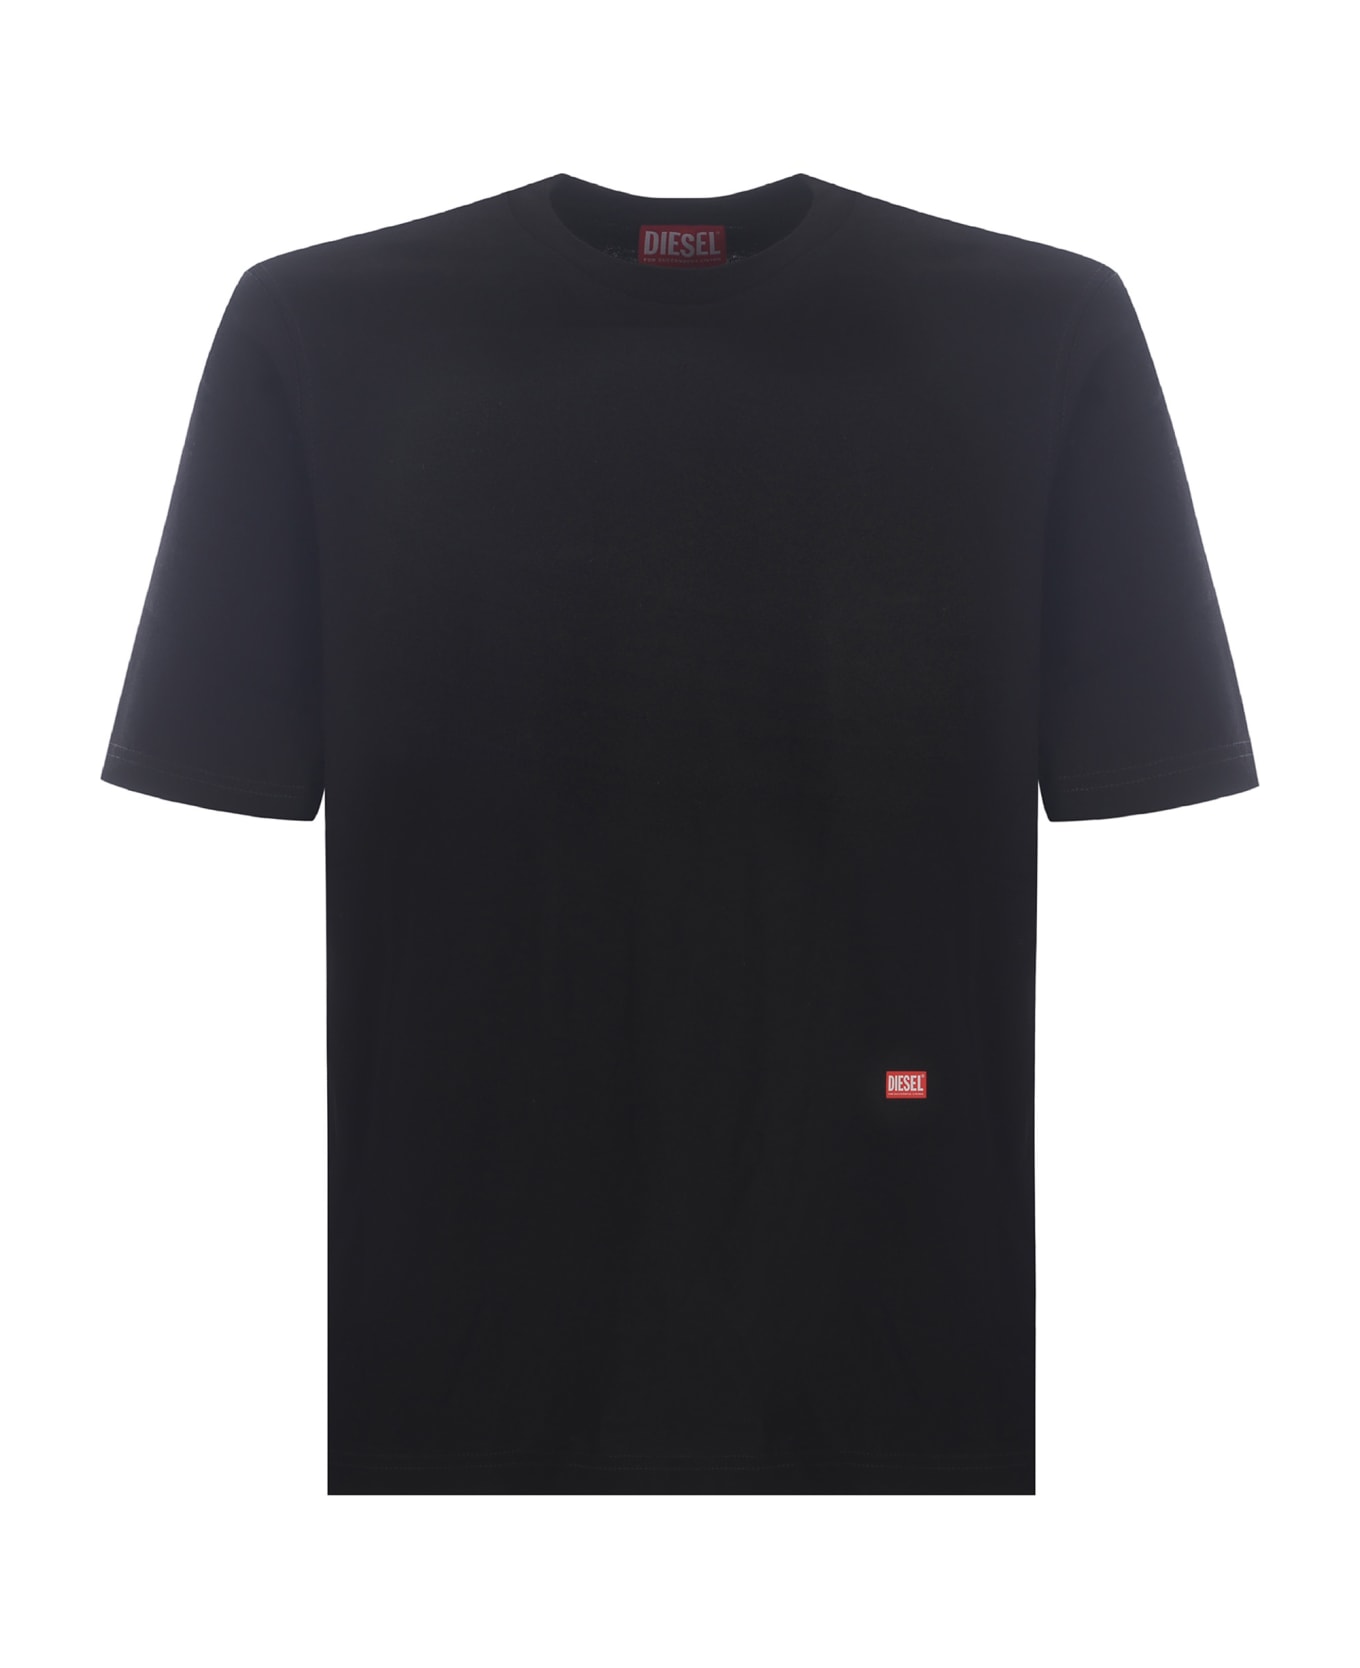 Diesel T-shirt Diesel "t-boxt-n11" Made Of Cotton Jersey - Nero シャツ